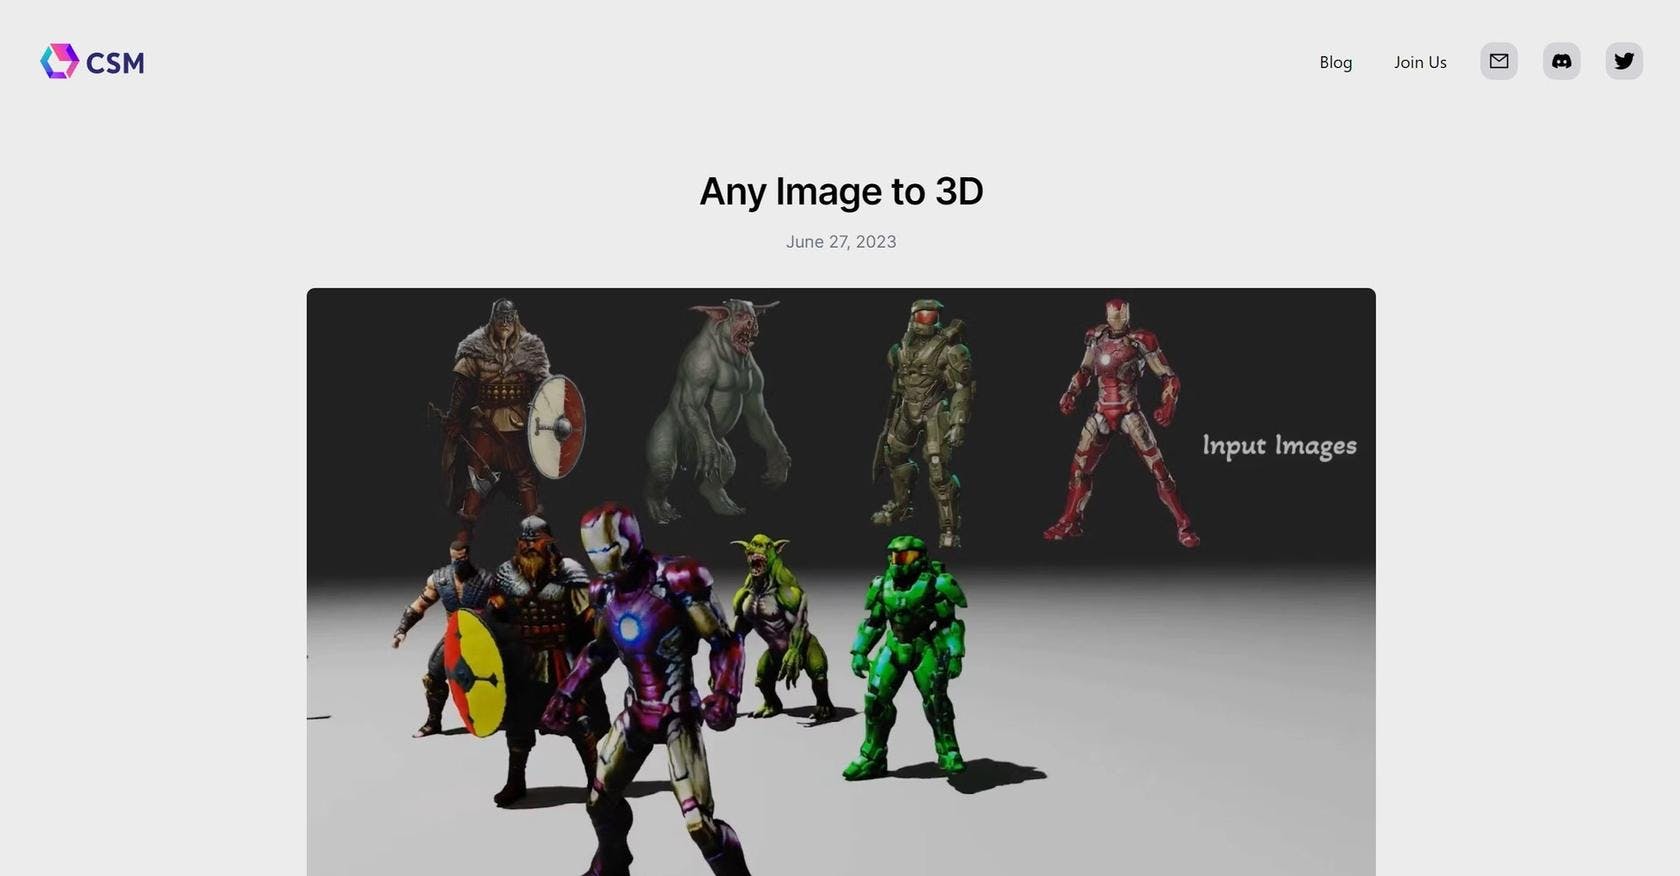 Any Image to 3D